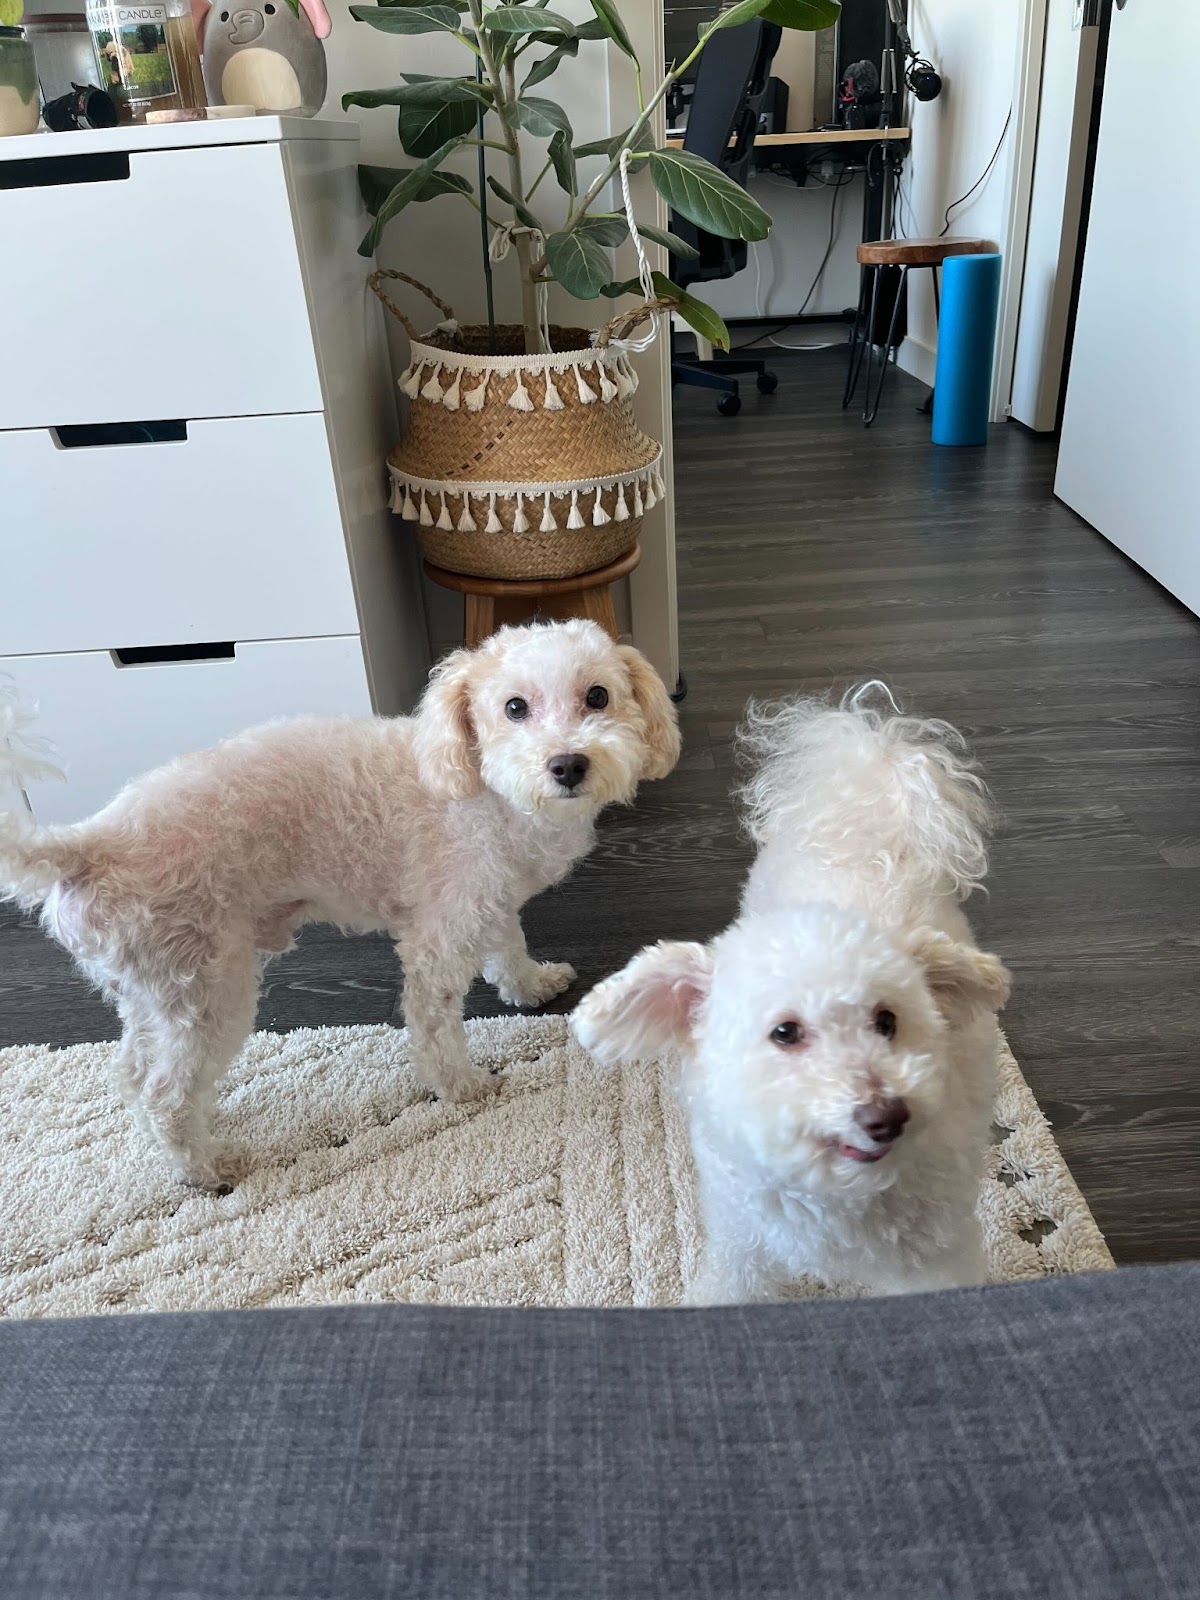 A picture of two small, white dogs.